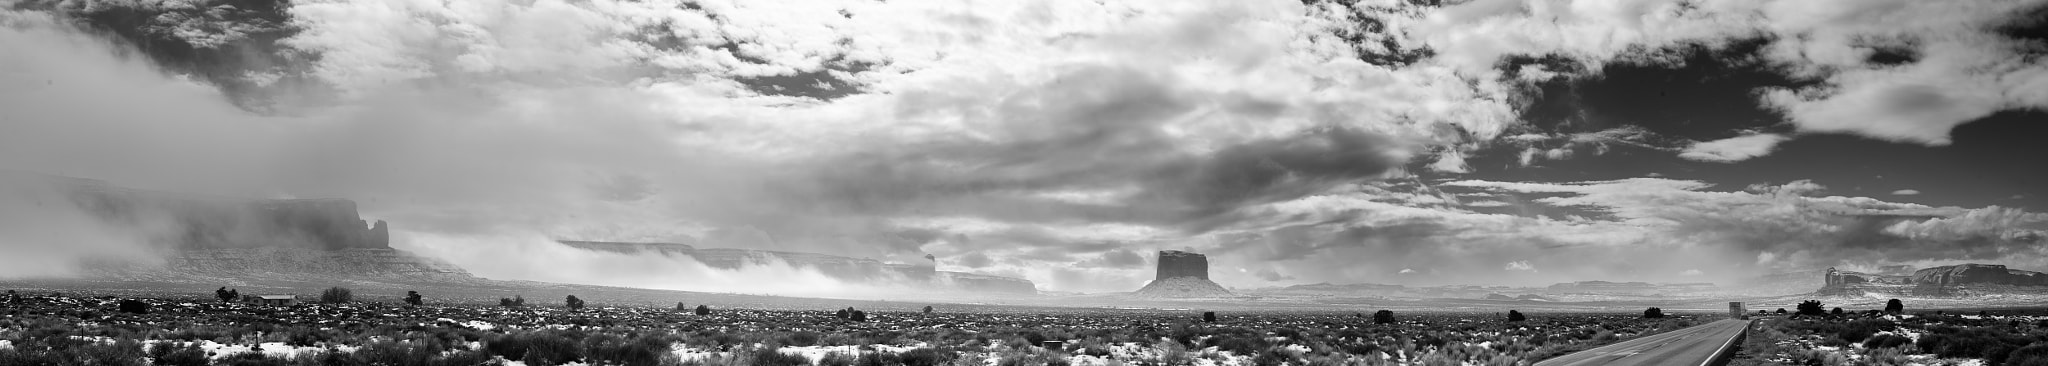 Nikon D800 sample photo. Entrance to monument valley photography